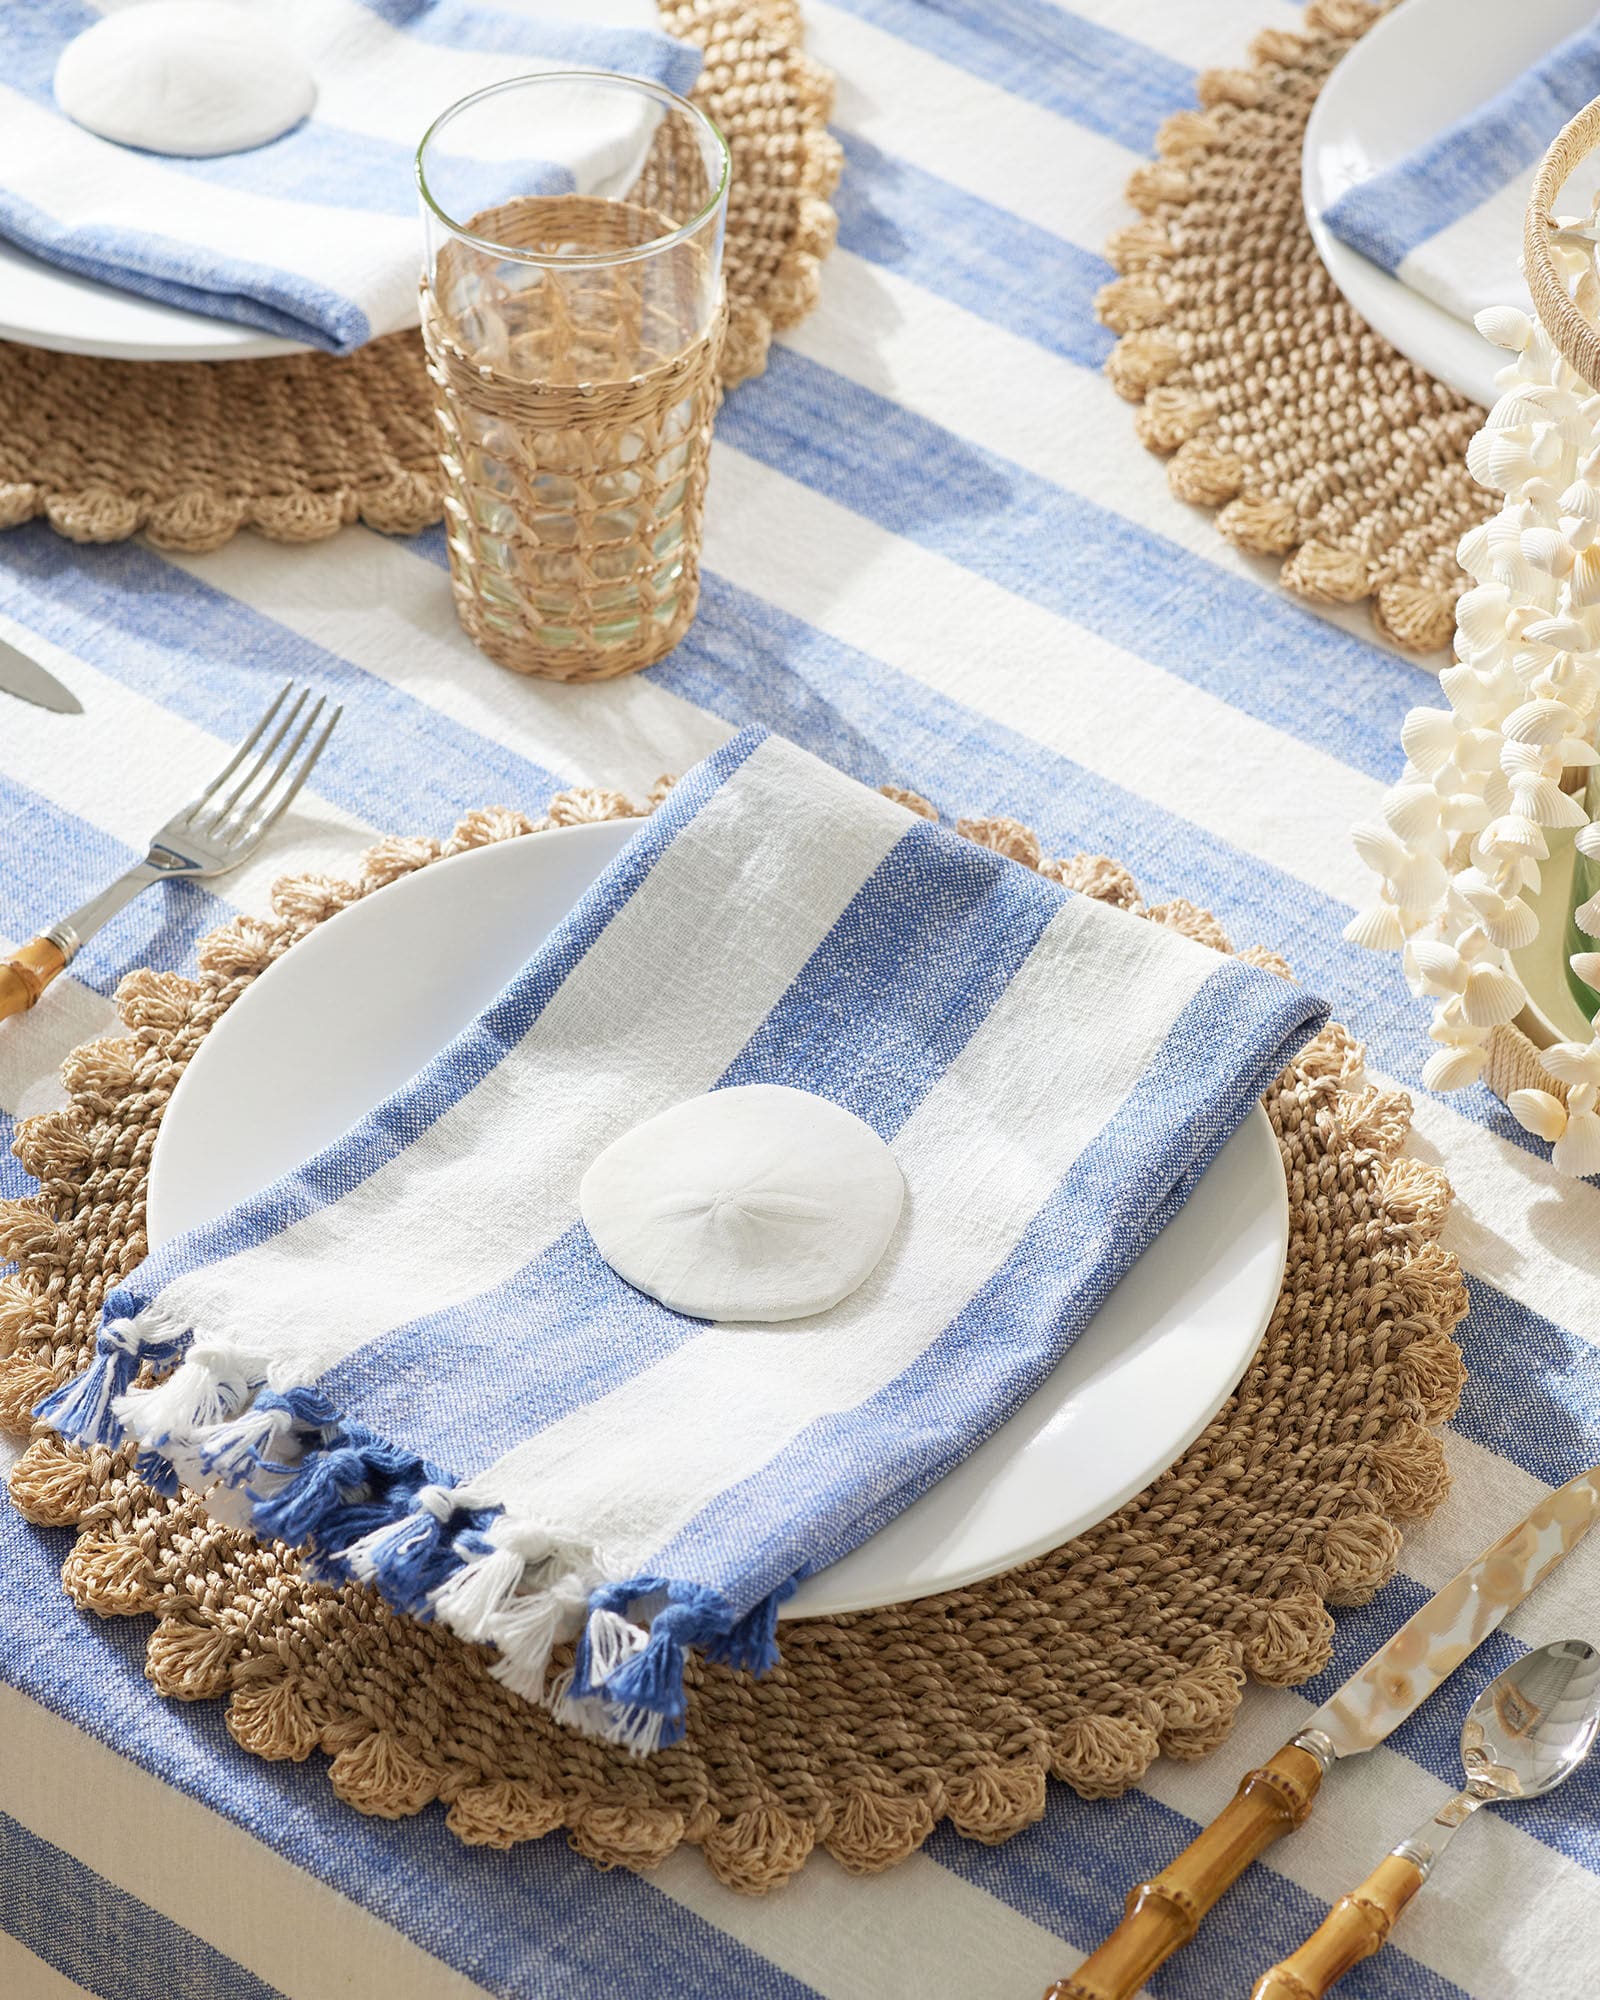 Fashionable Summer Tablesetting- serena & lily - blue and white - tabletop - party - entertainment - wicker placemats - 